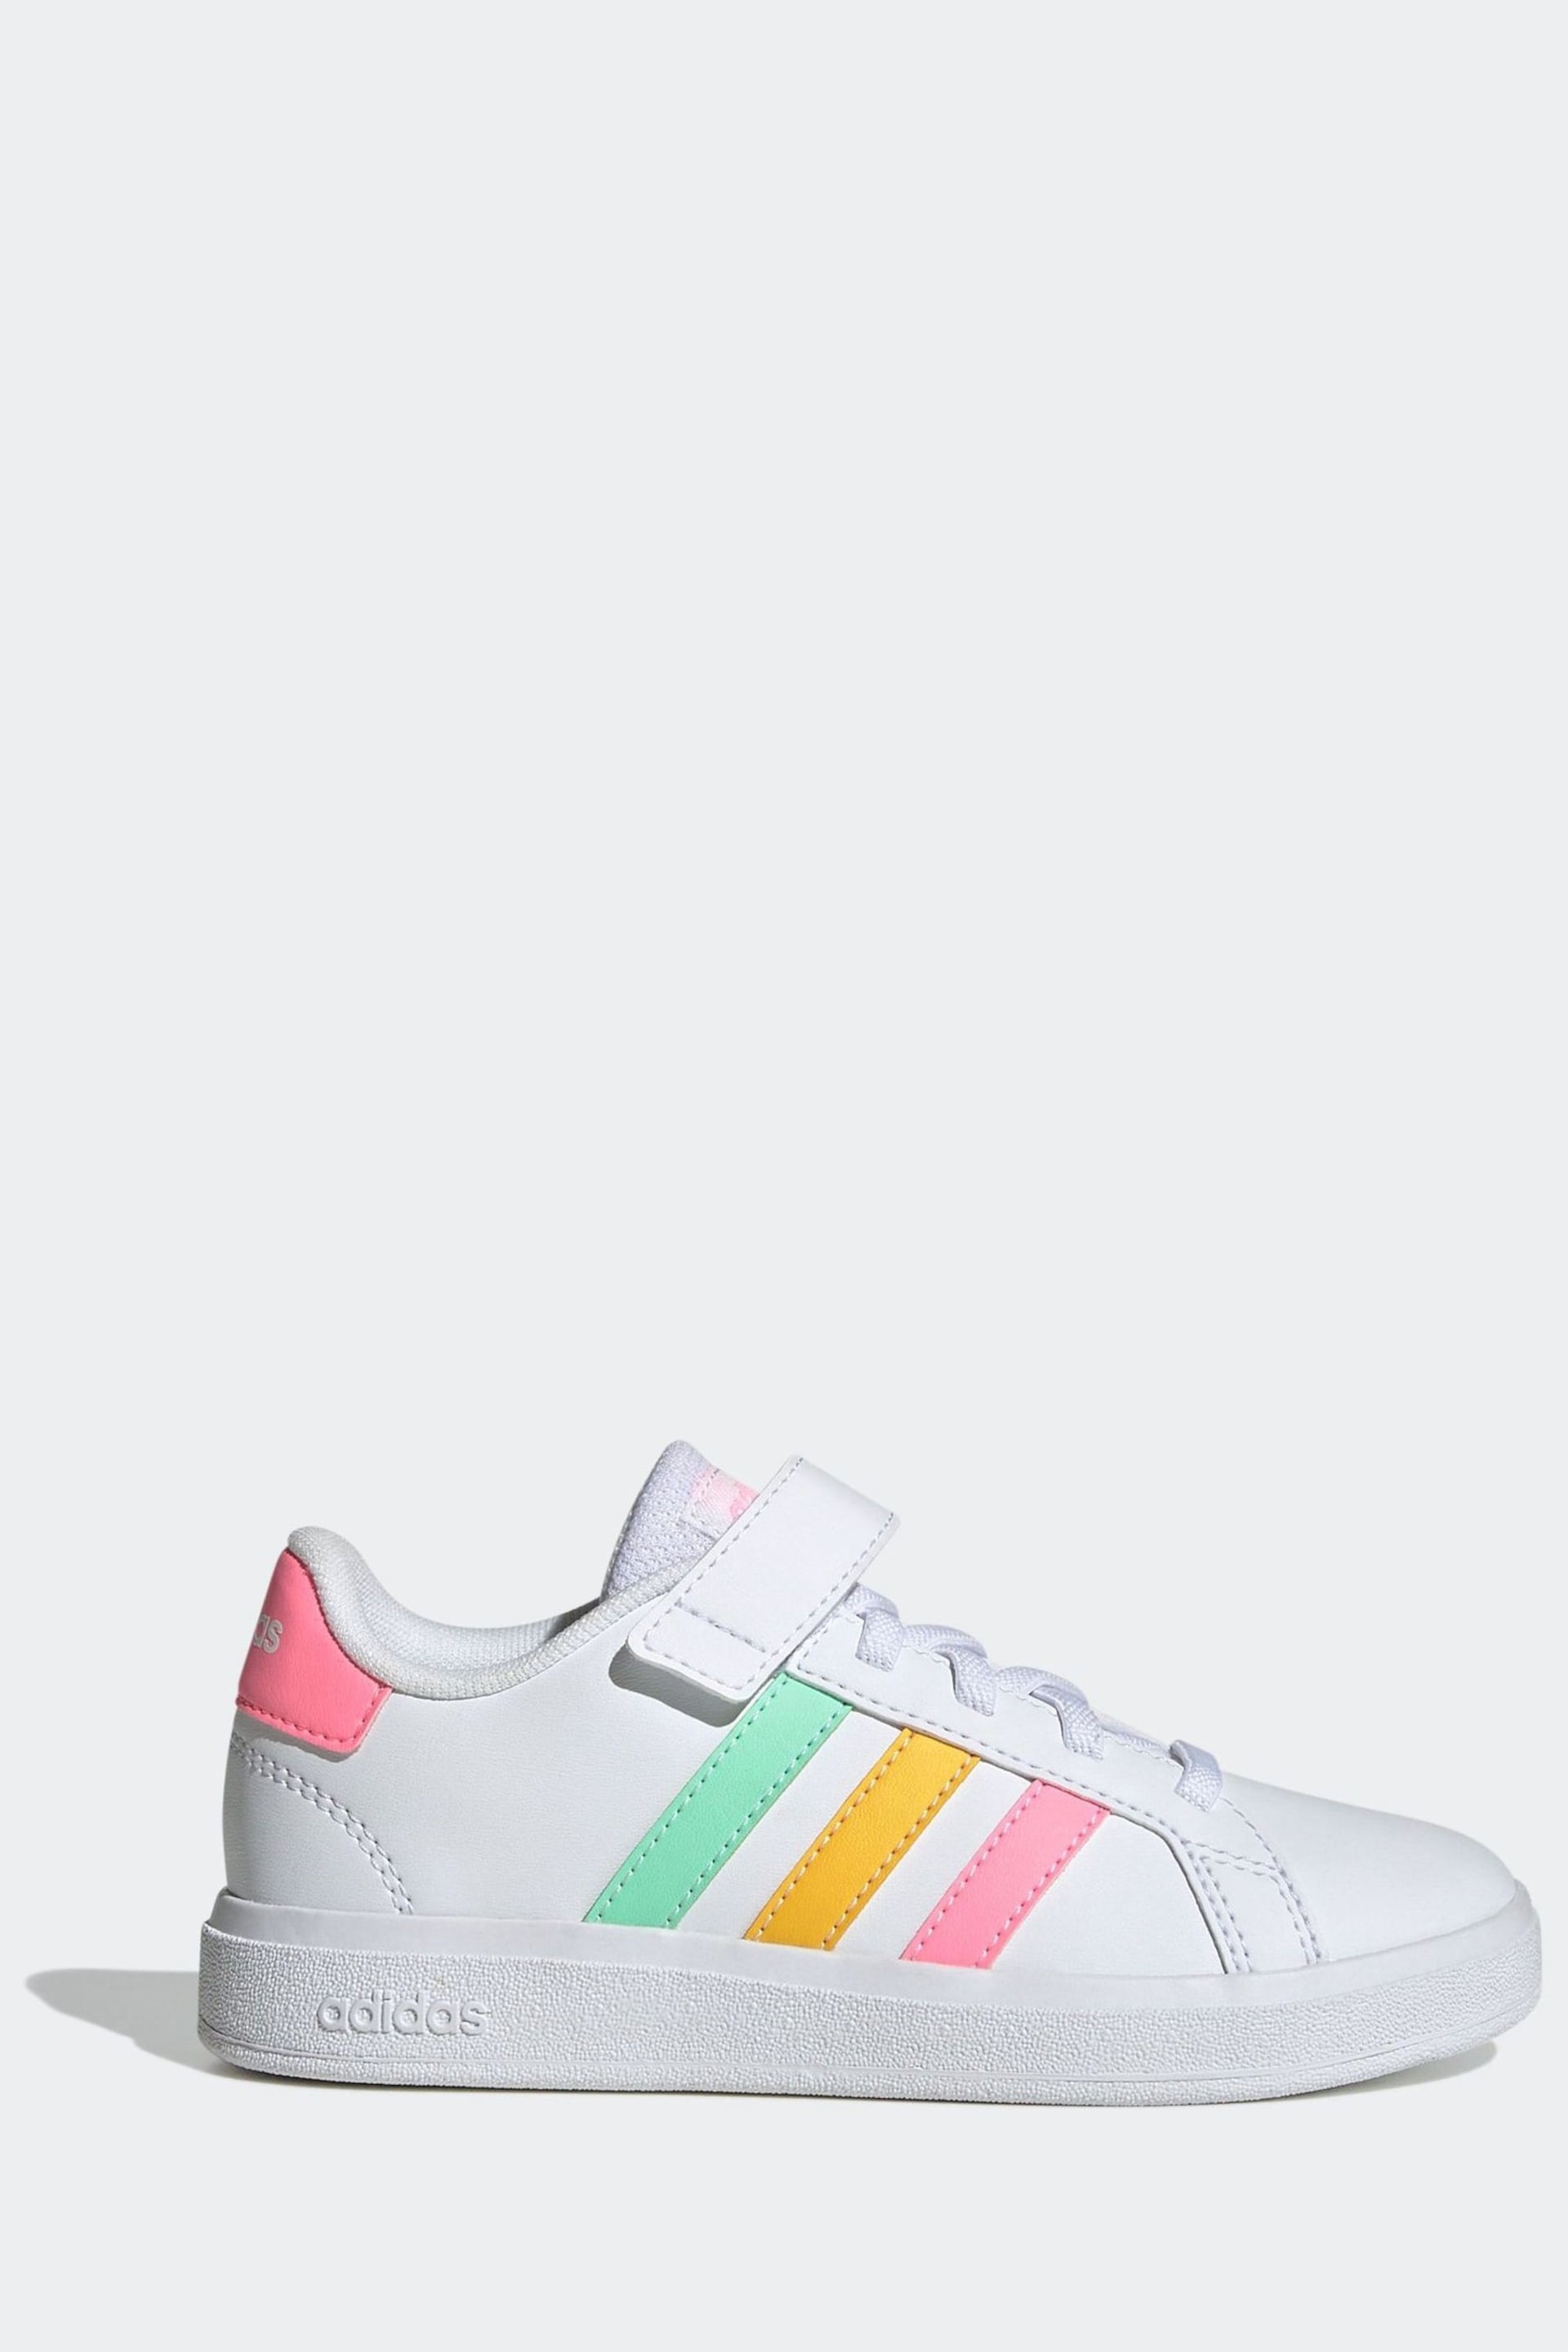 adidas White/Pink Sportswear Kids Grand Court Elastic Lace and Top Strap Trainers - Image 1 of 9